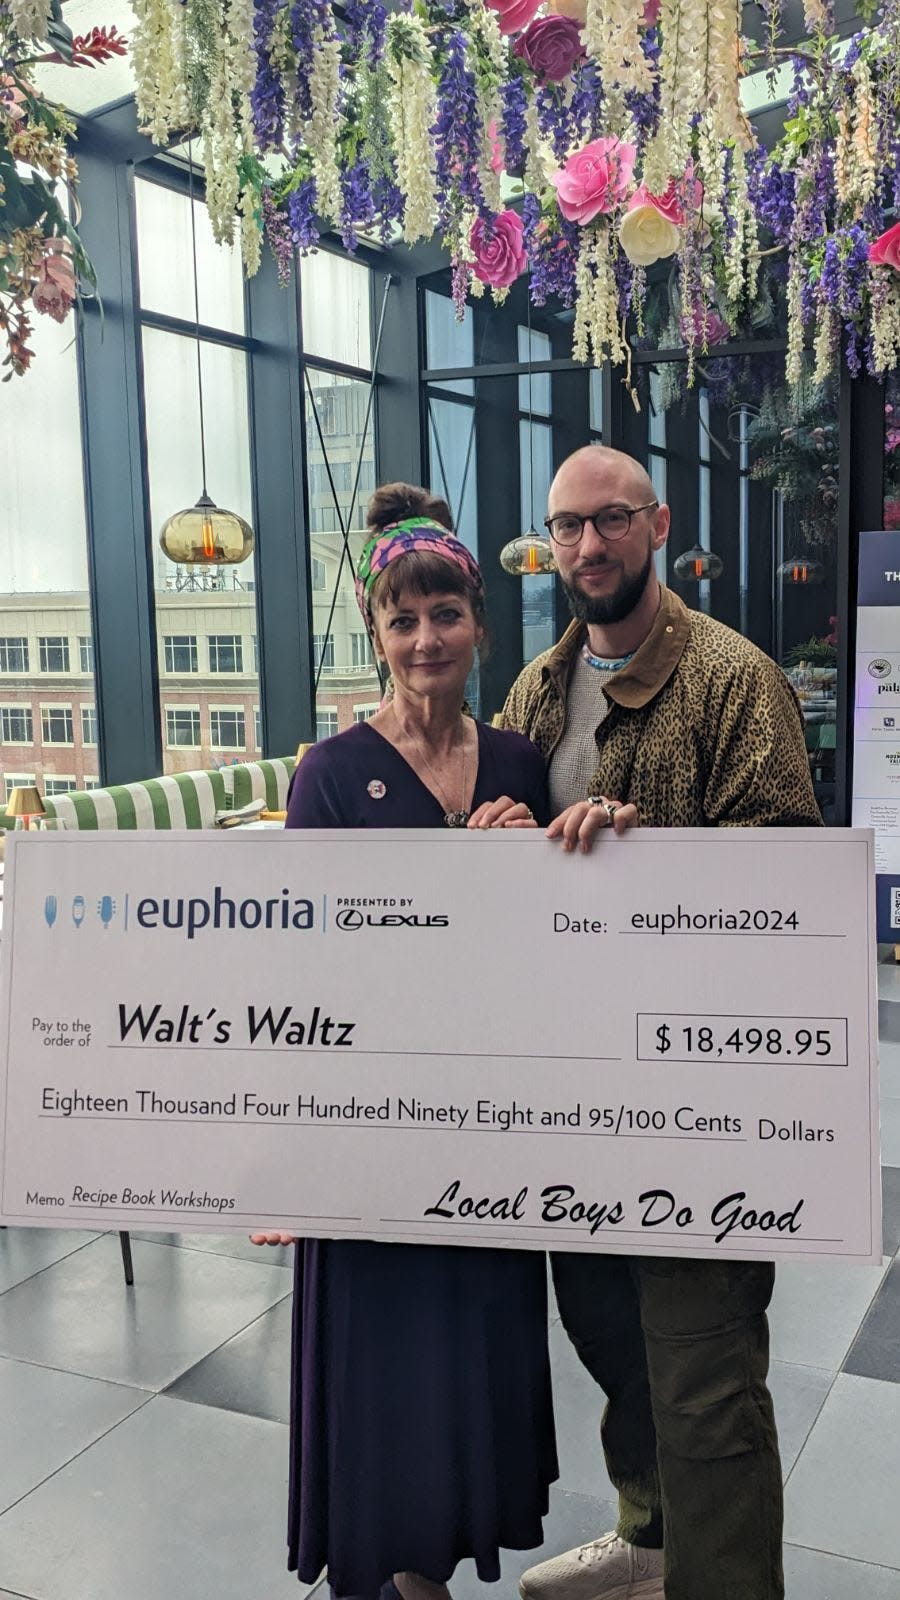 Walt's Waltz recieved a grant from euphoria. Susan Fischer Crooks and Will Crooks with the ceremonial check.